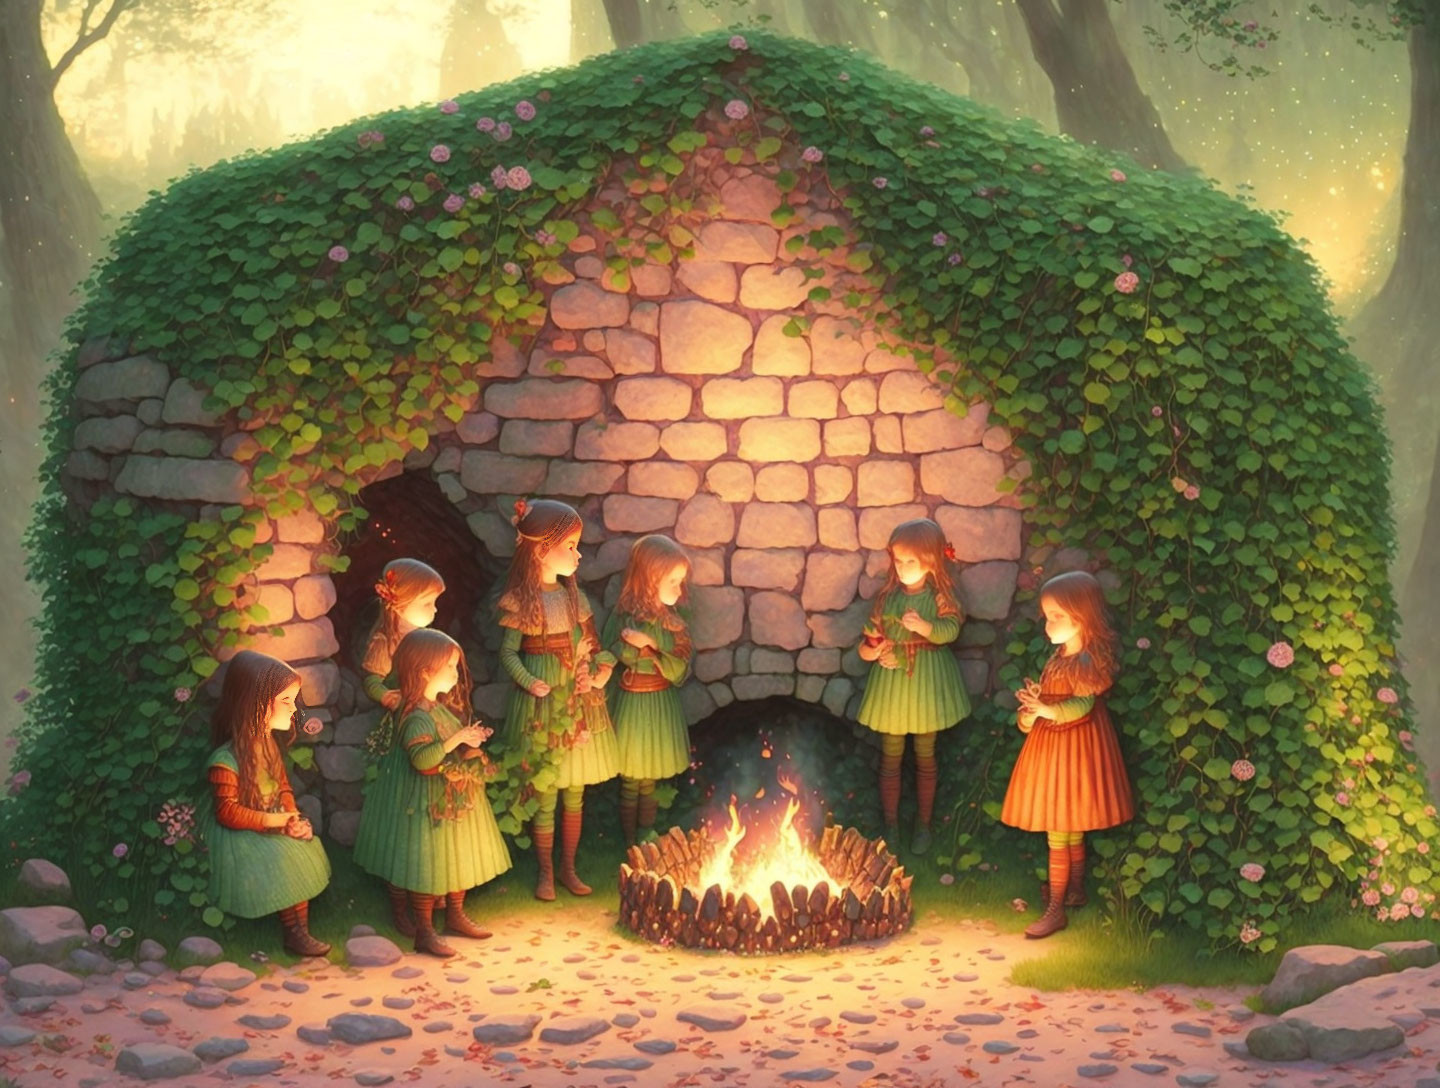 Seven elf-like characters in magical forest around bonfire by stone house